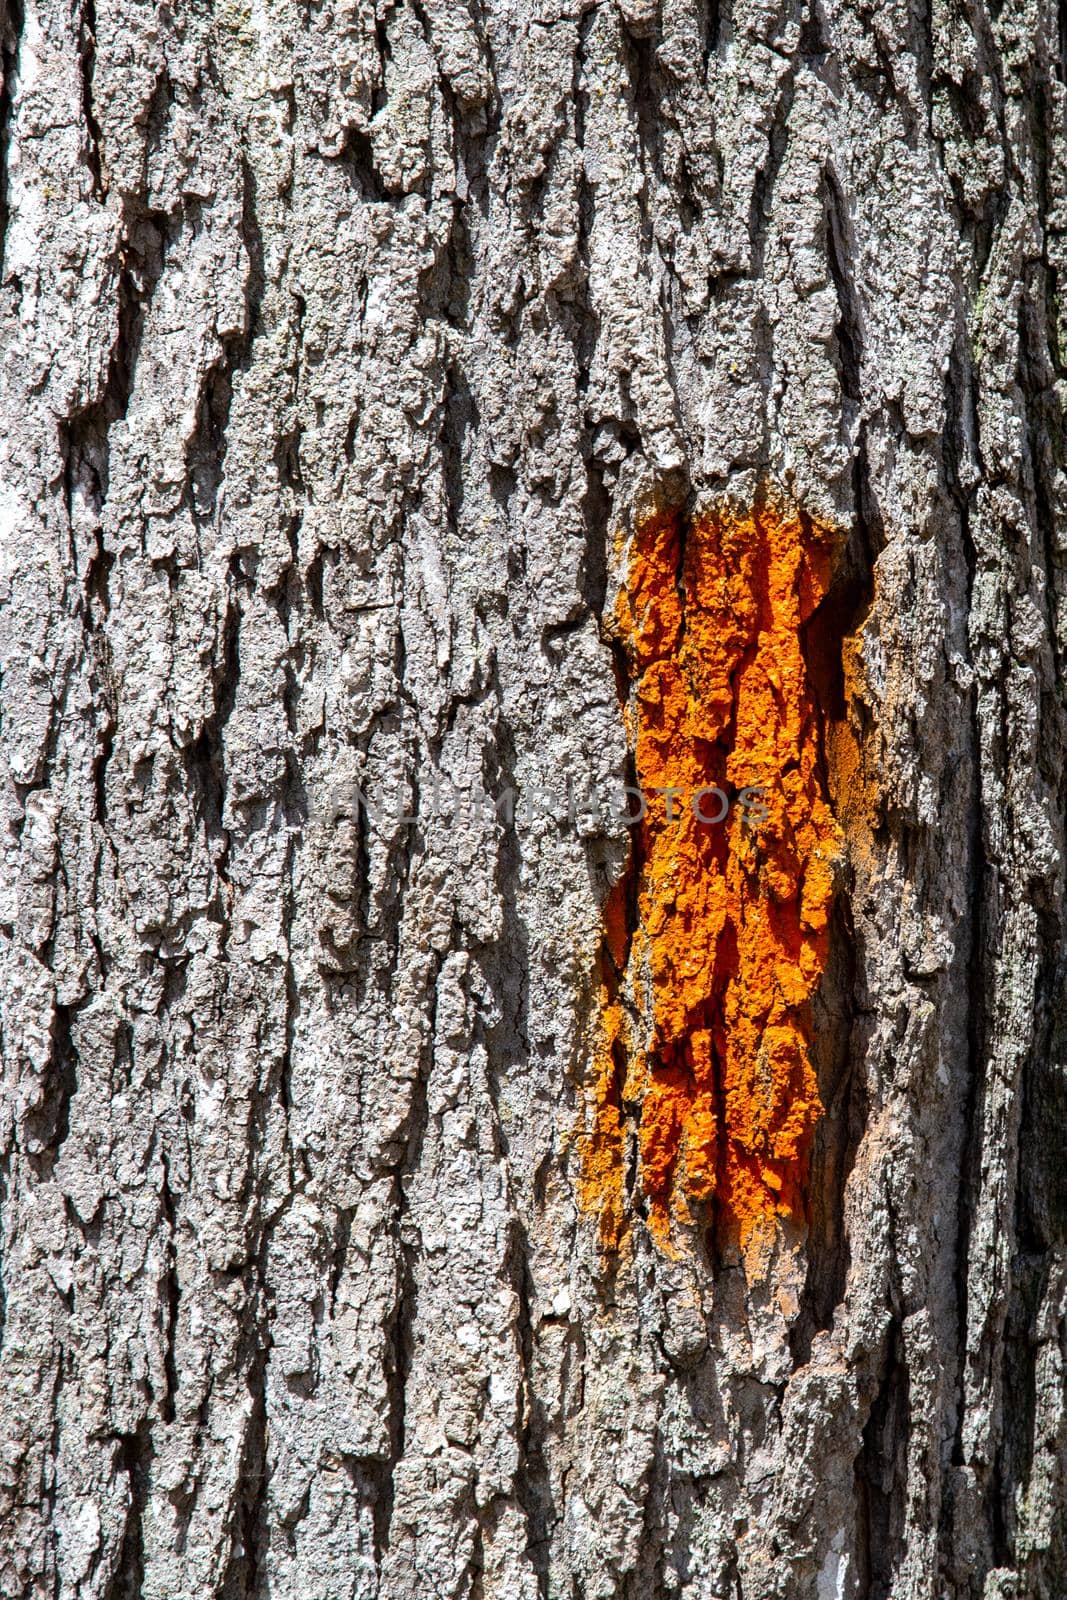 An orange painted rectangle appears on a close-up view of the textured gray bark of a tree trunk. The marking serves to guide hikers on a recreational nature trail.